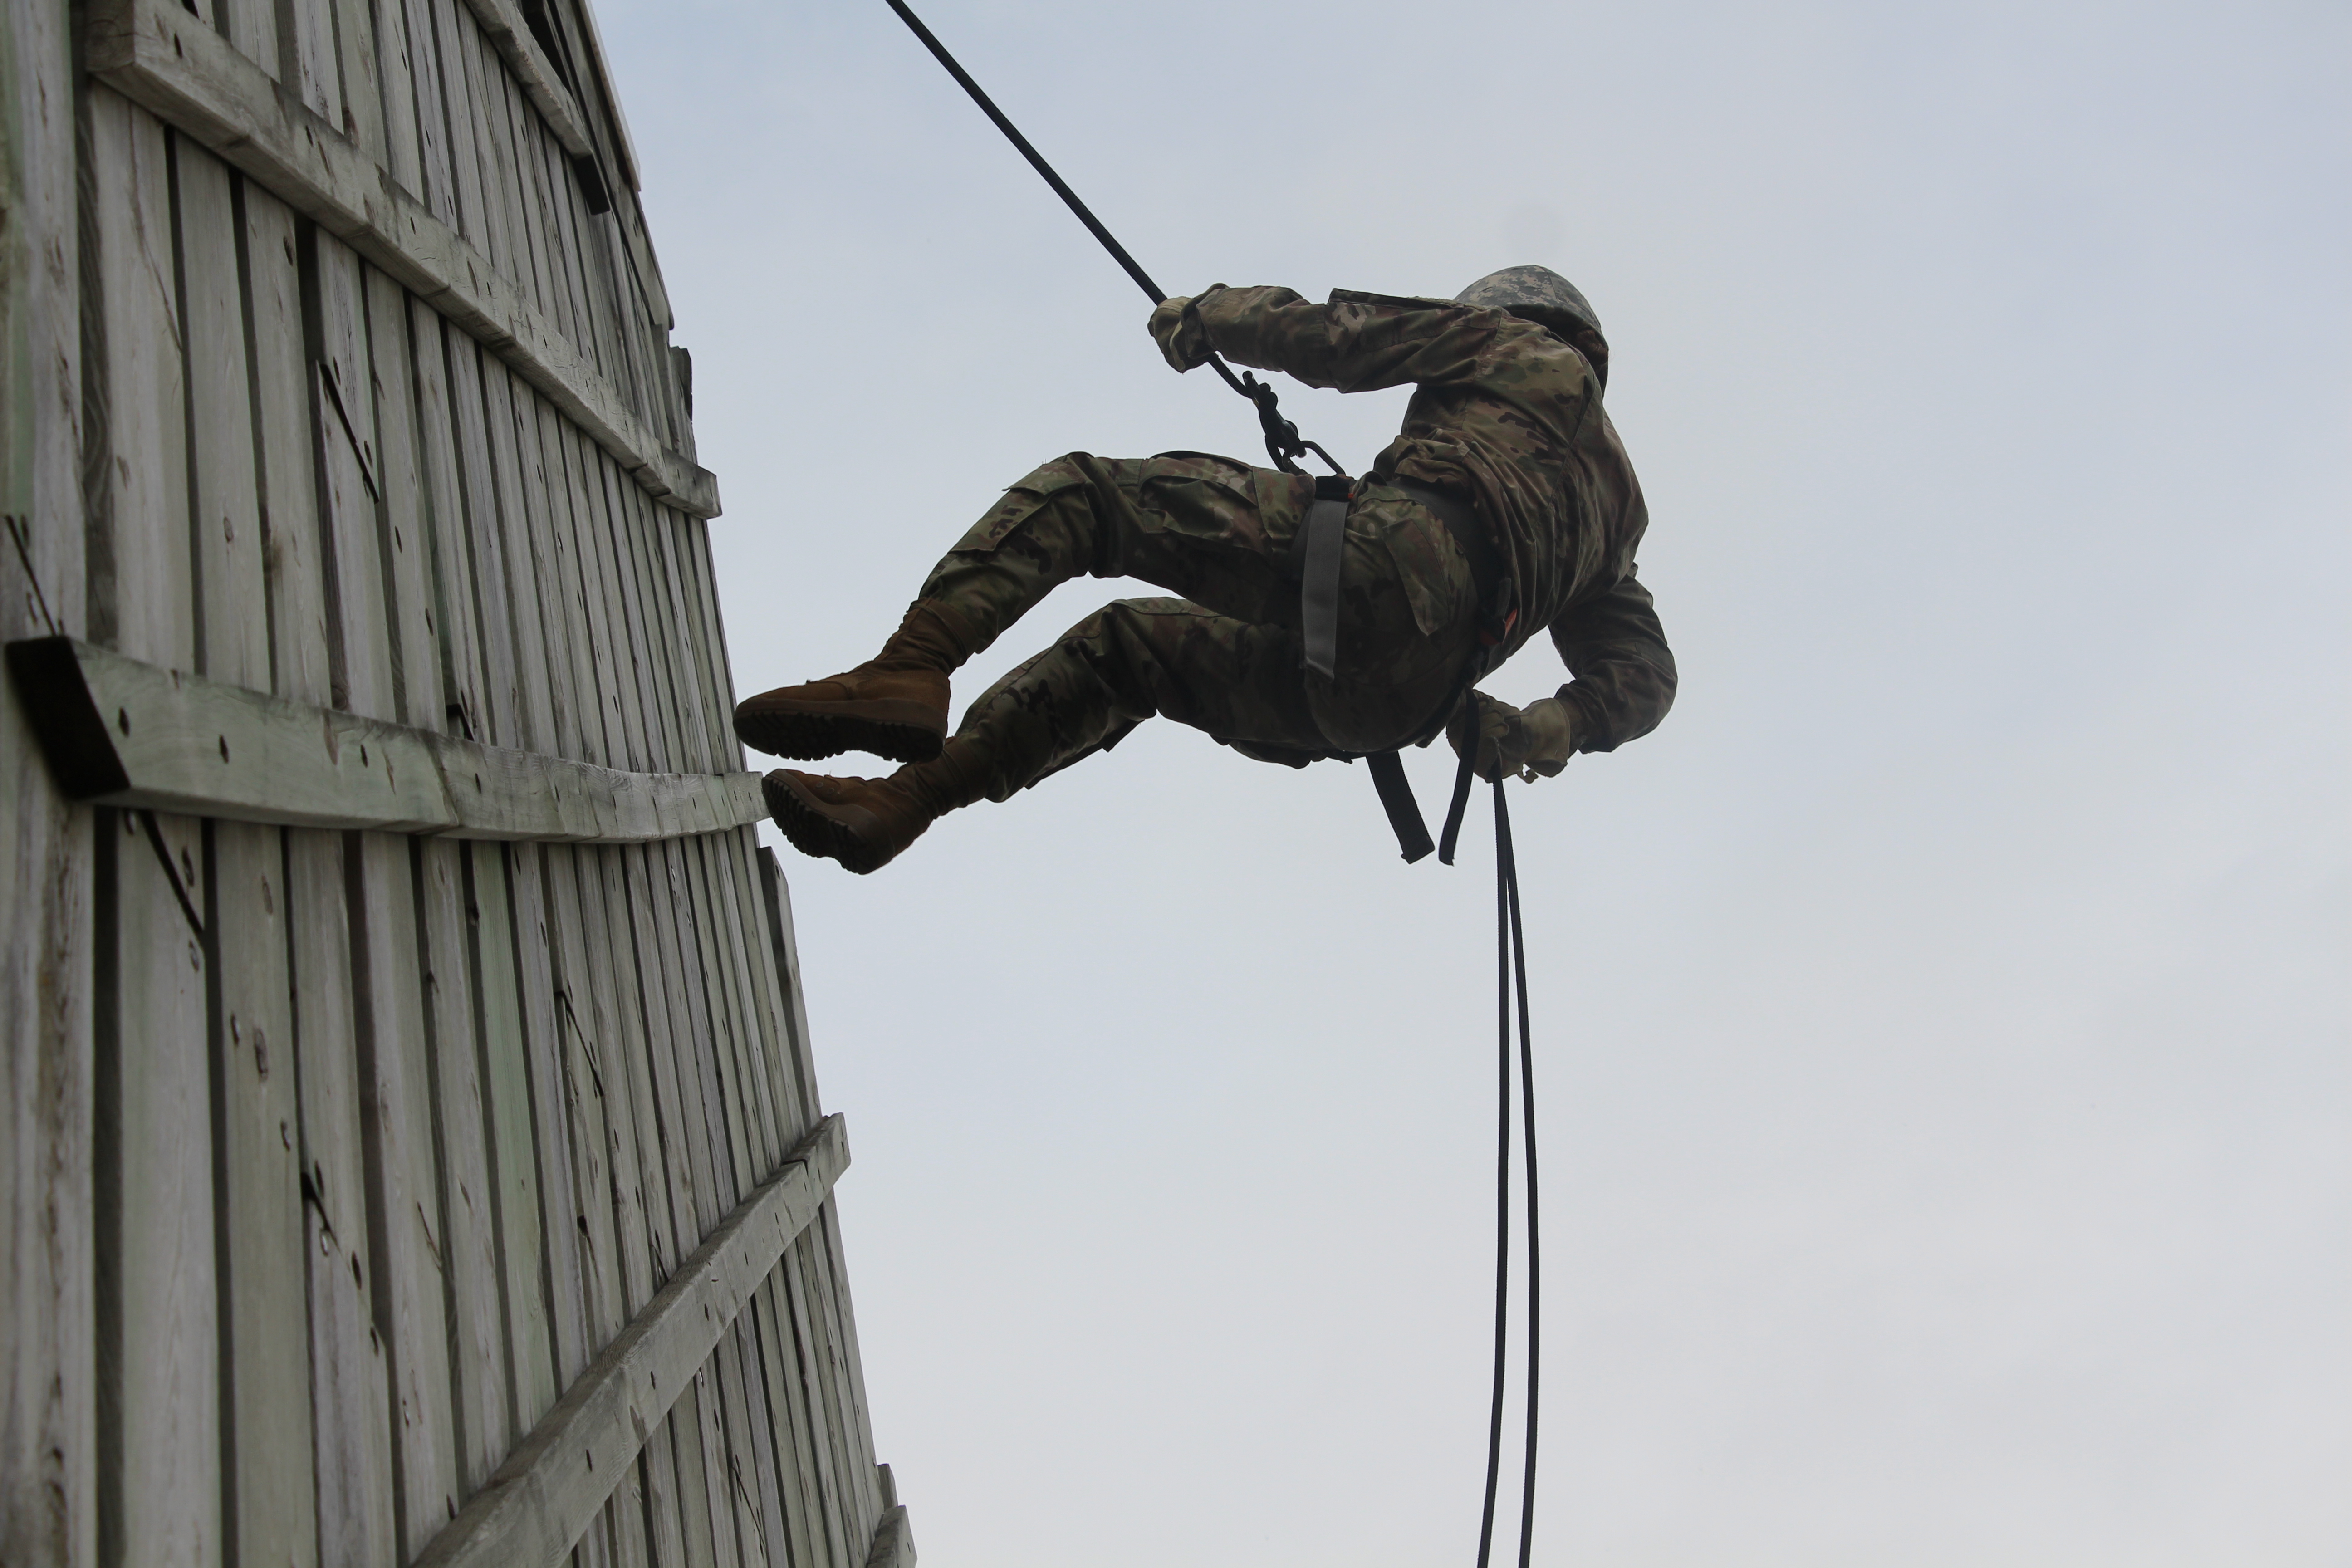 ROTC holds field training exercise in Yankton